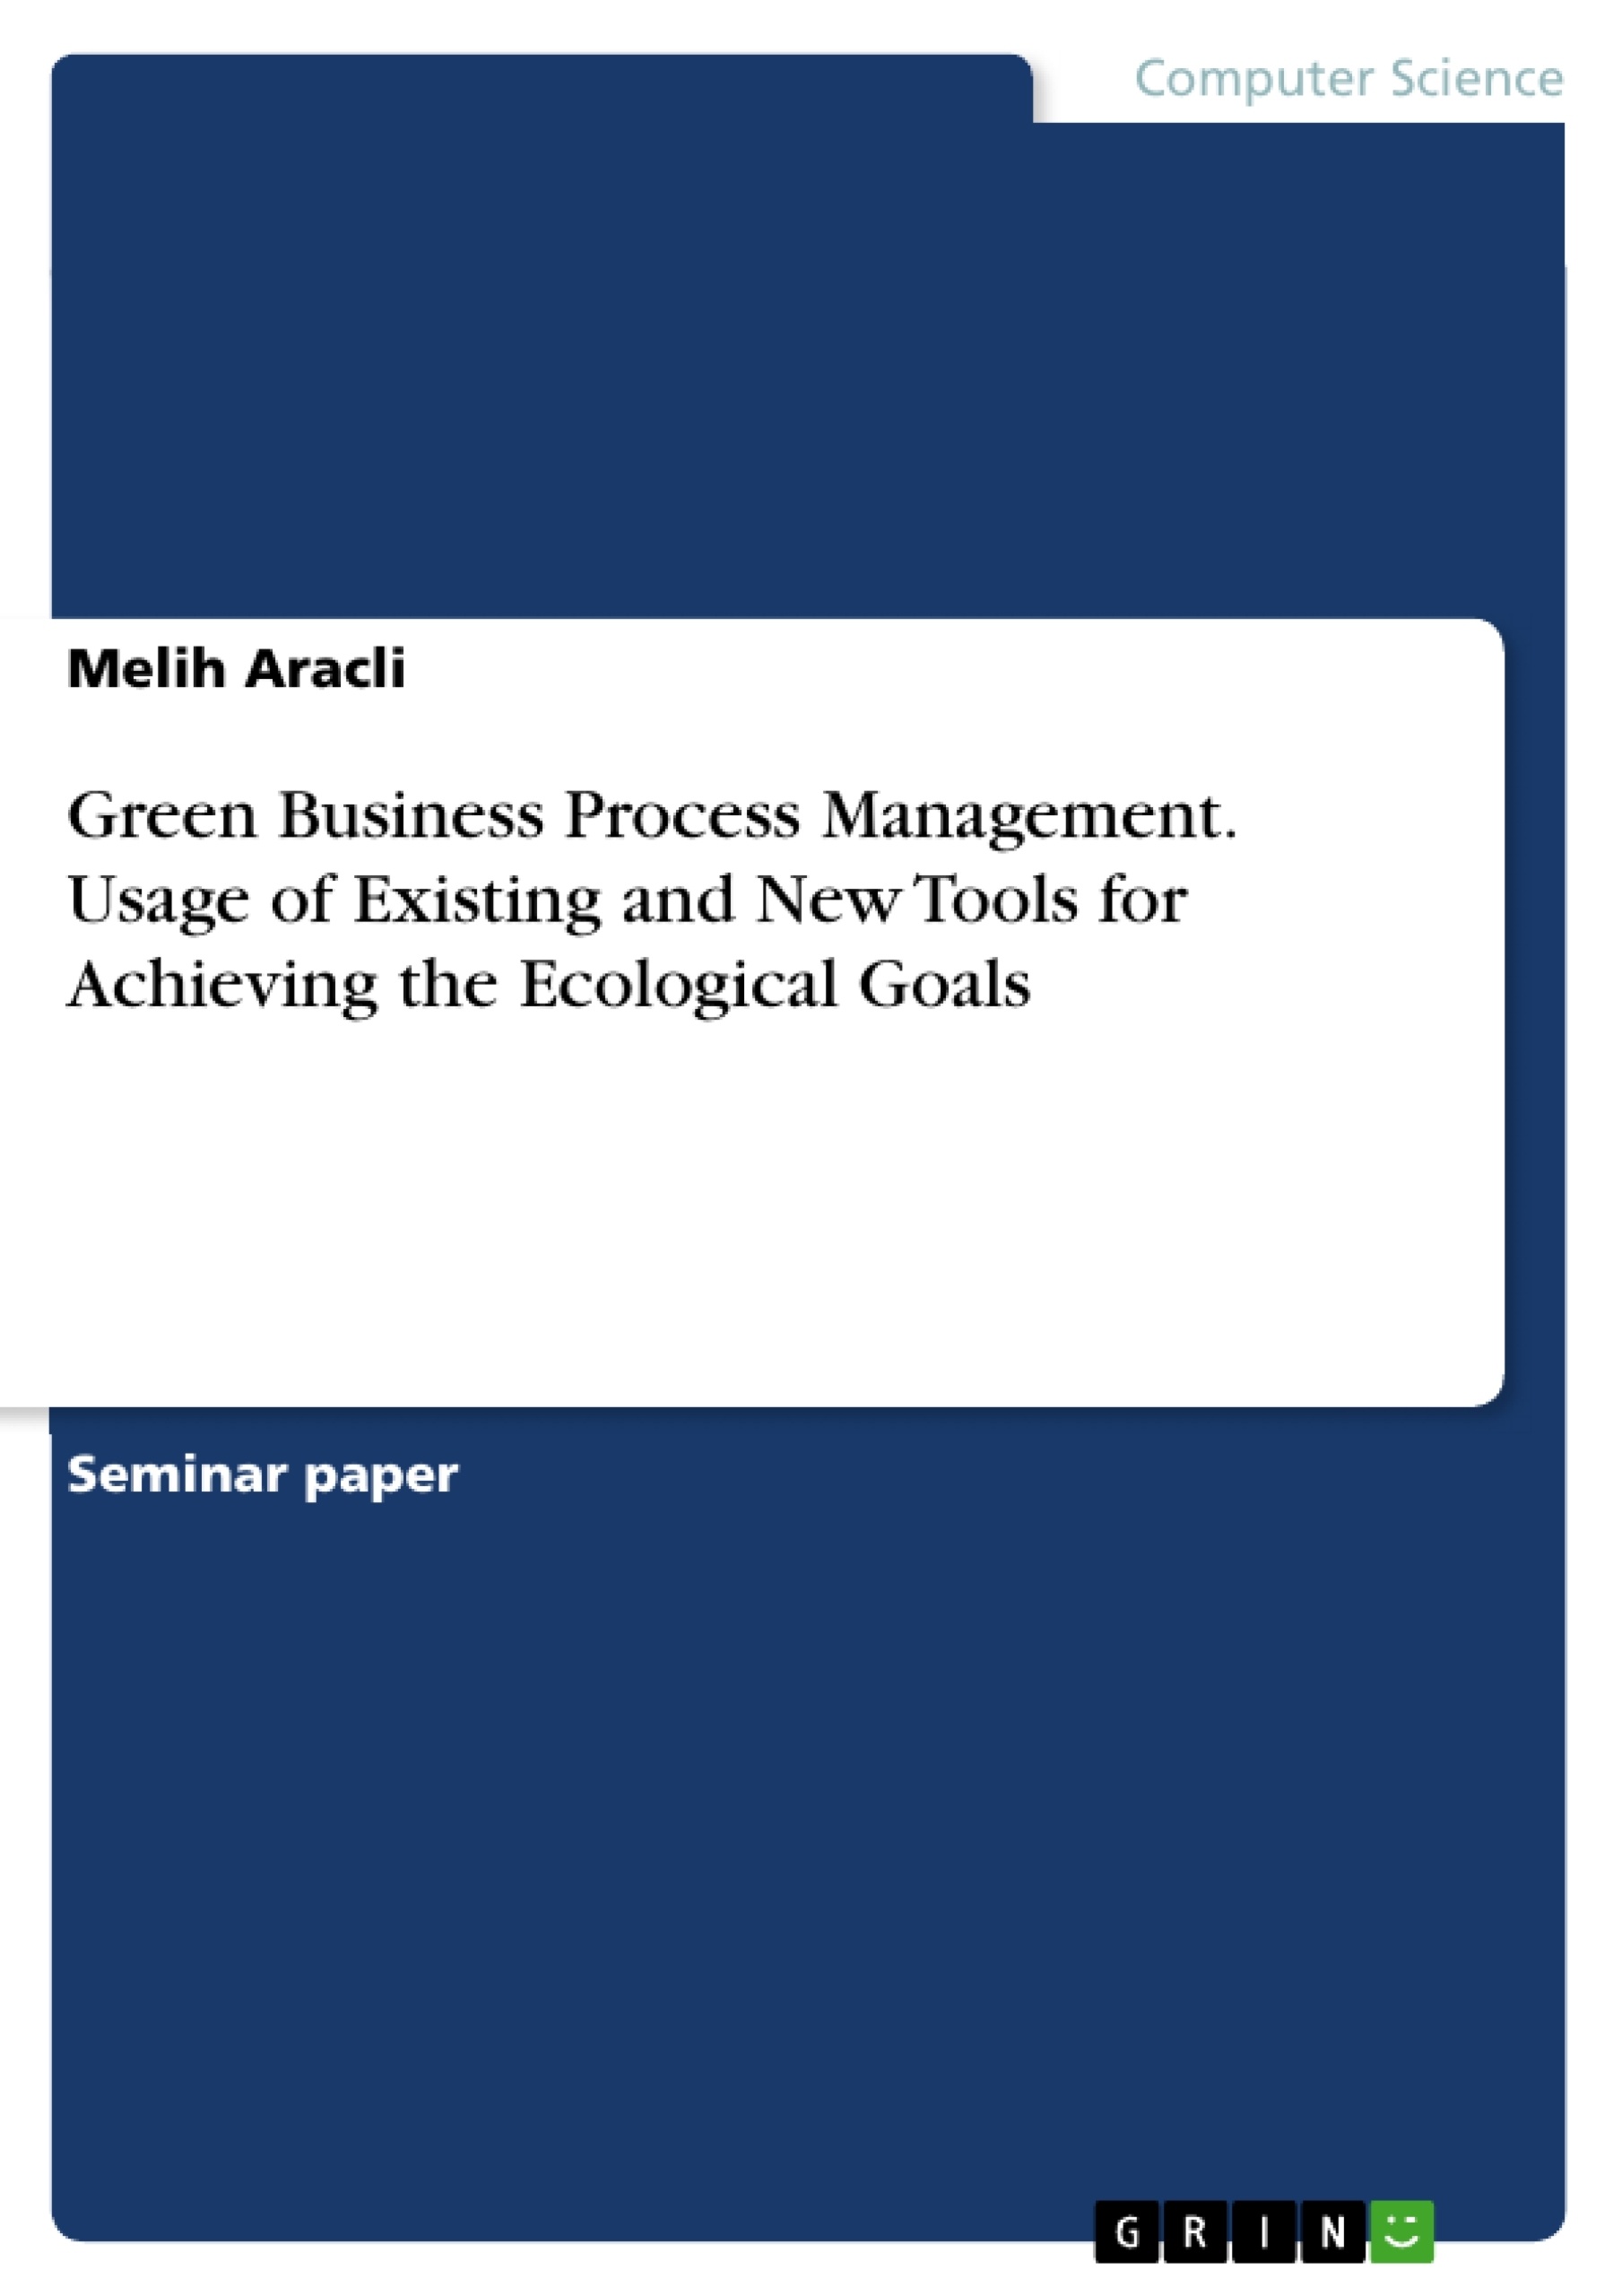 Title: Green Business Process Management. Usage of Existing and New Tools for Achieving the Ecological Goals